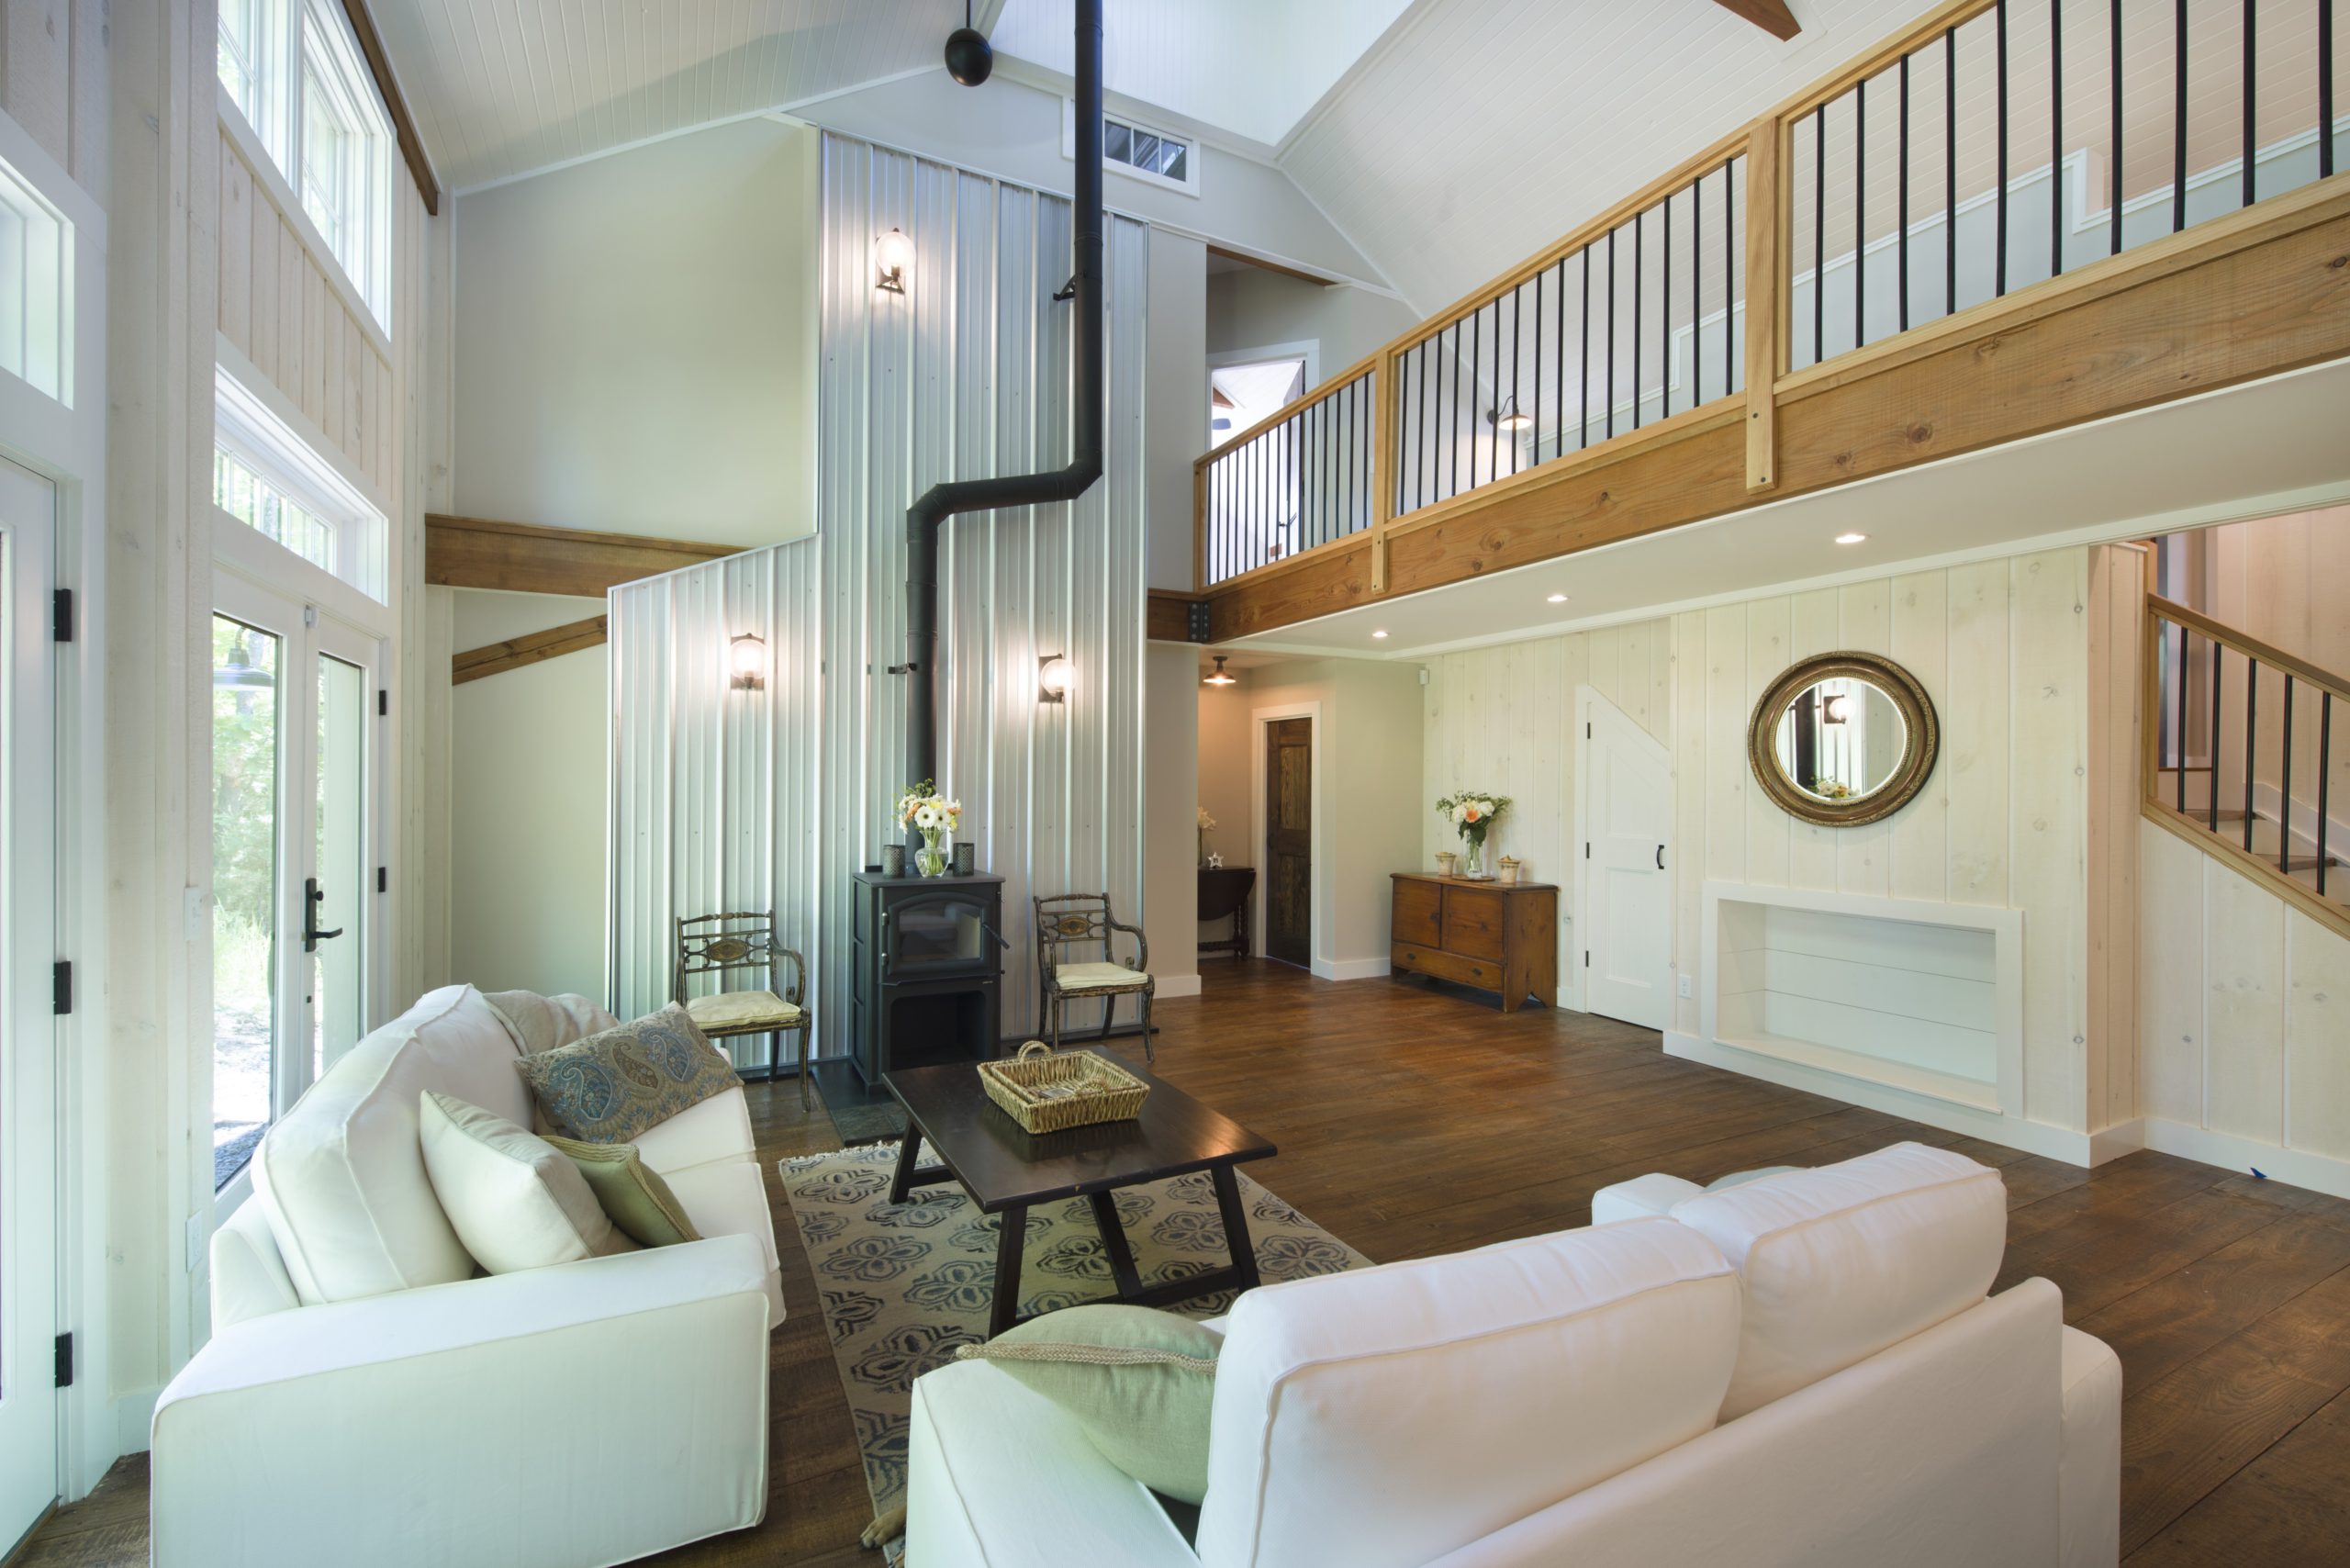 An interior picture of the living room of the Mountaintop Family Home, designed and built by Geobarns, with vaulted ceilings, exposed timber framing, metal firebreak behind a wood stove, mezzanine catwalk, and cupola high above.